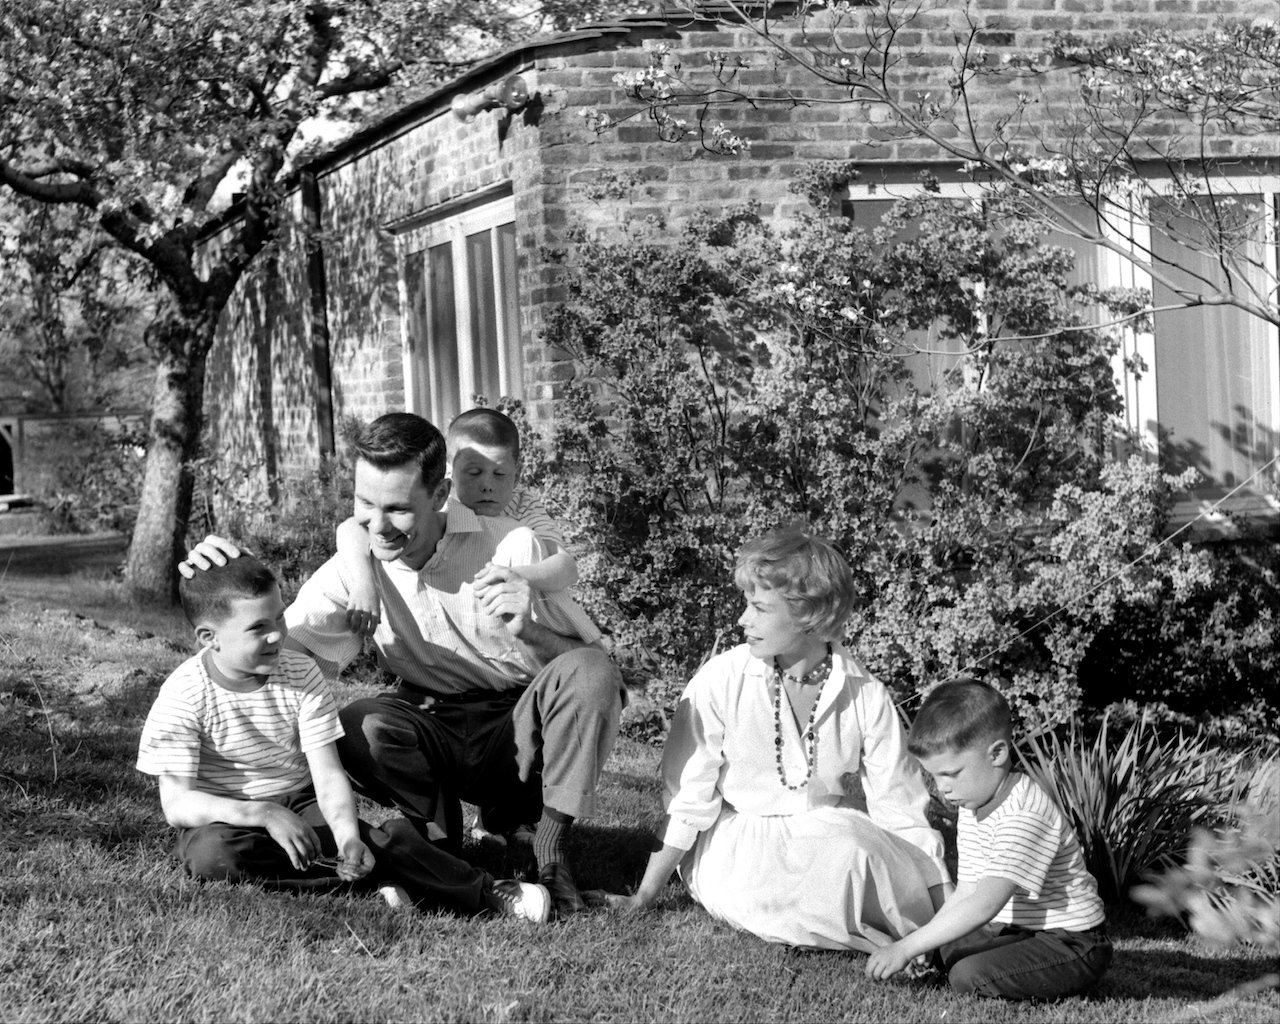 Black and white photo of Johnny Carson and his wife, Jody, on the lawn of their home, playing with their three young kids c. 1958